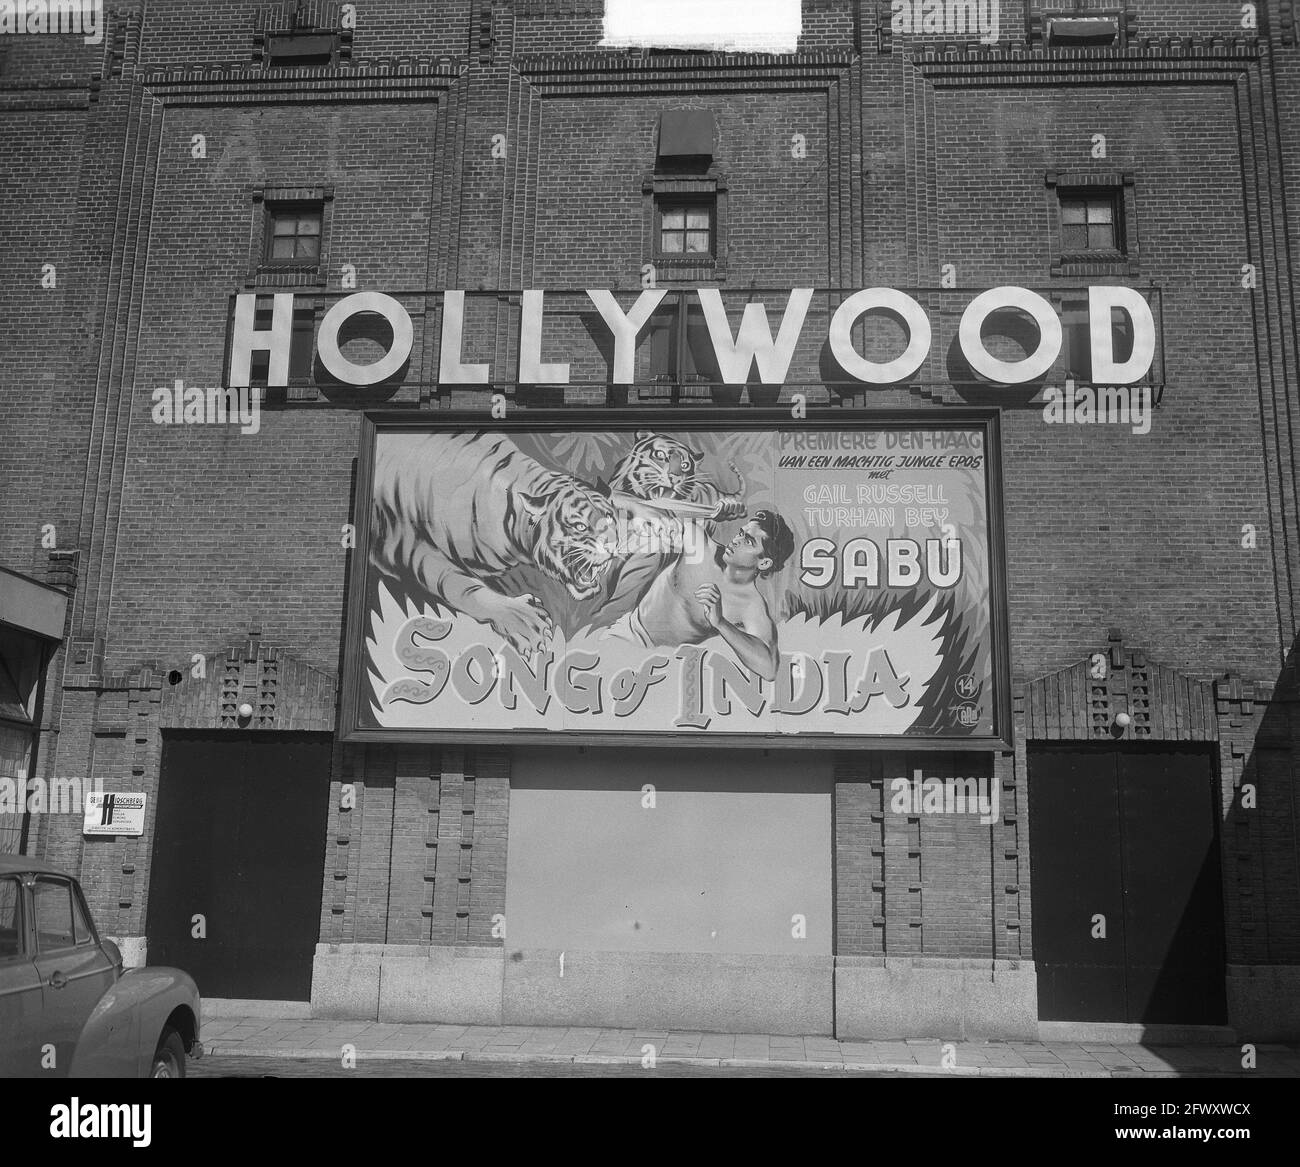 Advertisement for the film Song of India on facade cinema Hollywood, April 12, 1950, cinemas, advertising, The Netherlands, 20th century press agency Stock Photo